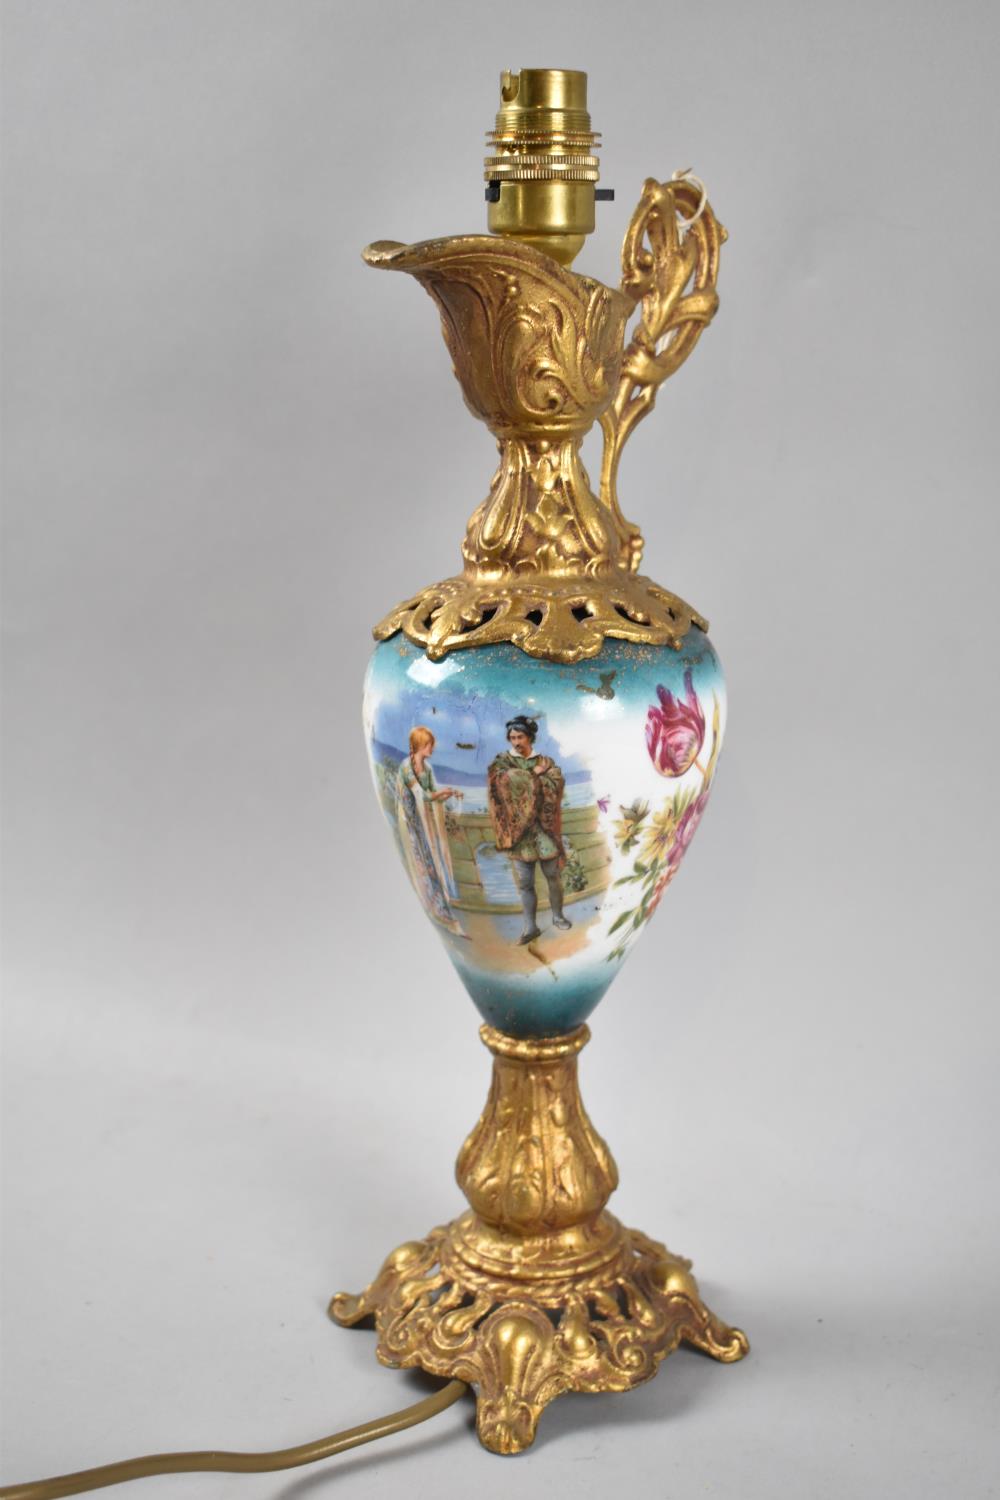 A Novelty Continental Table Lamp Base in the Form of a Gilt and Porcelain Claret Jug Decorated